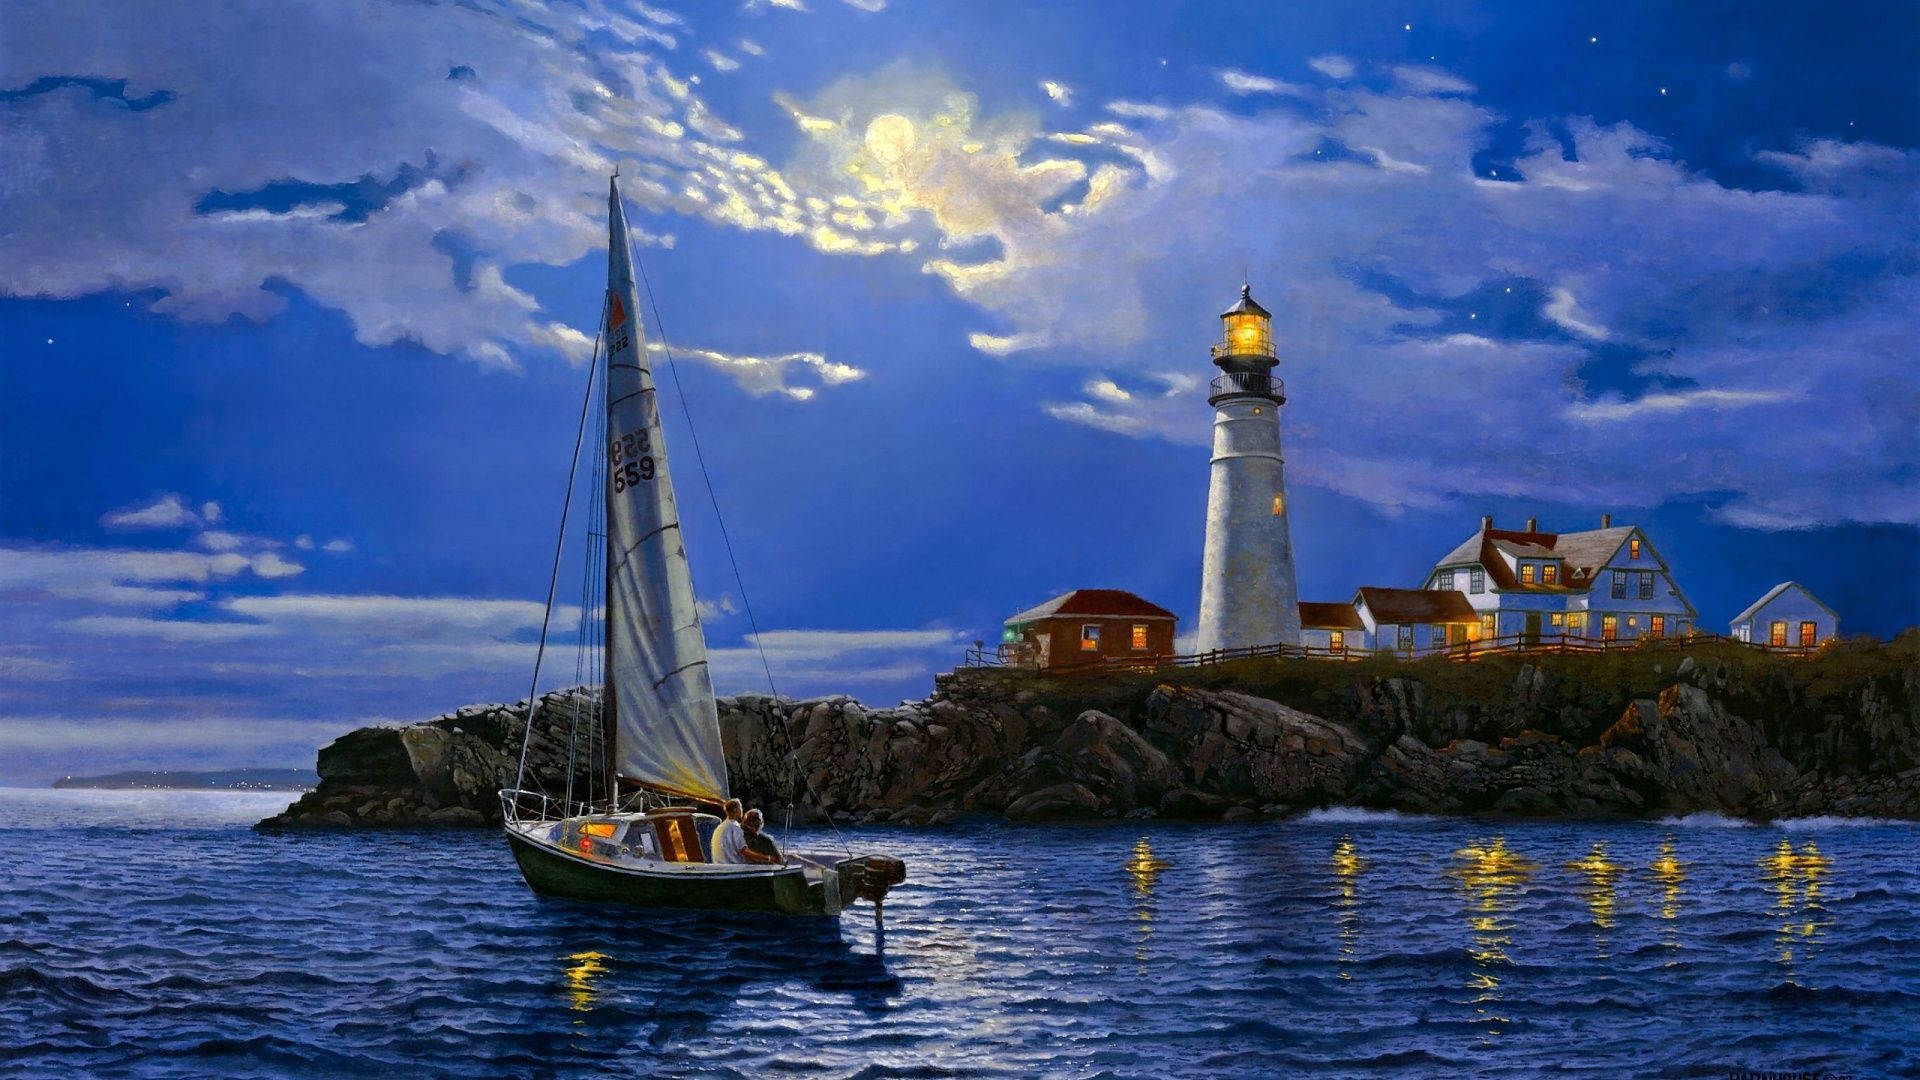 Lighthouse Evening Painting Wallpaper